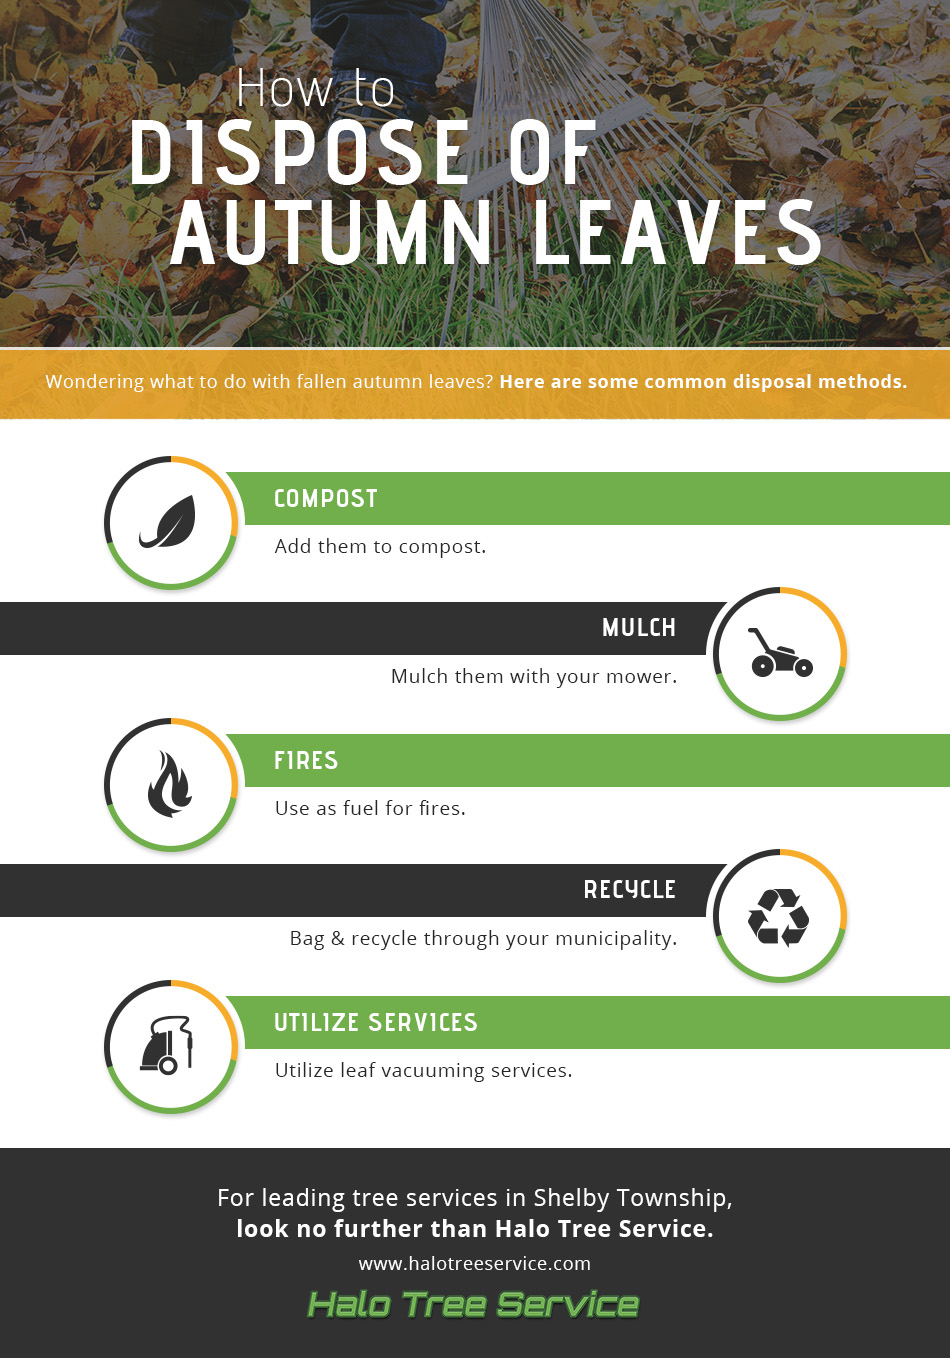 How-to-Dispose-of-Autumn-Leaves-infographic-609066fb75a0b